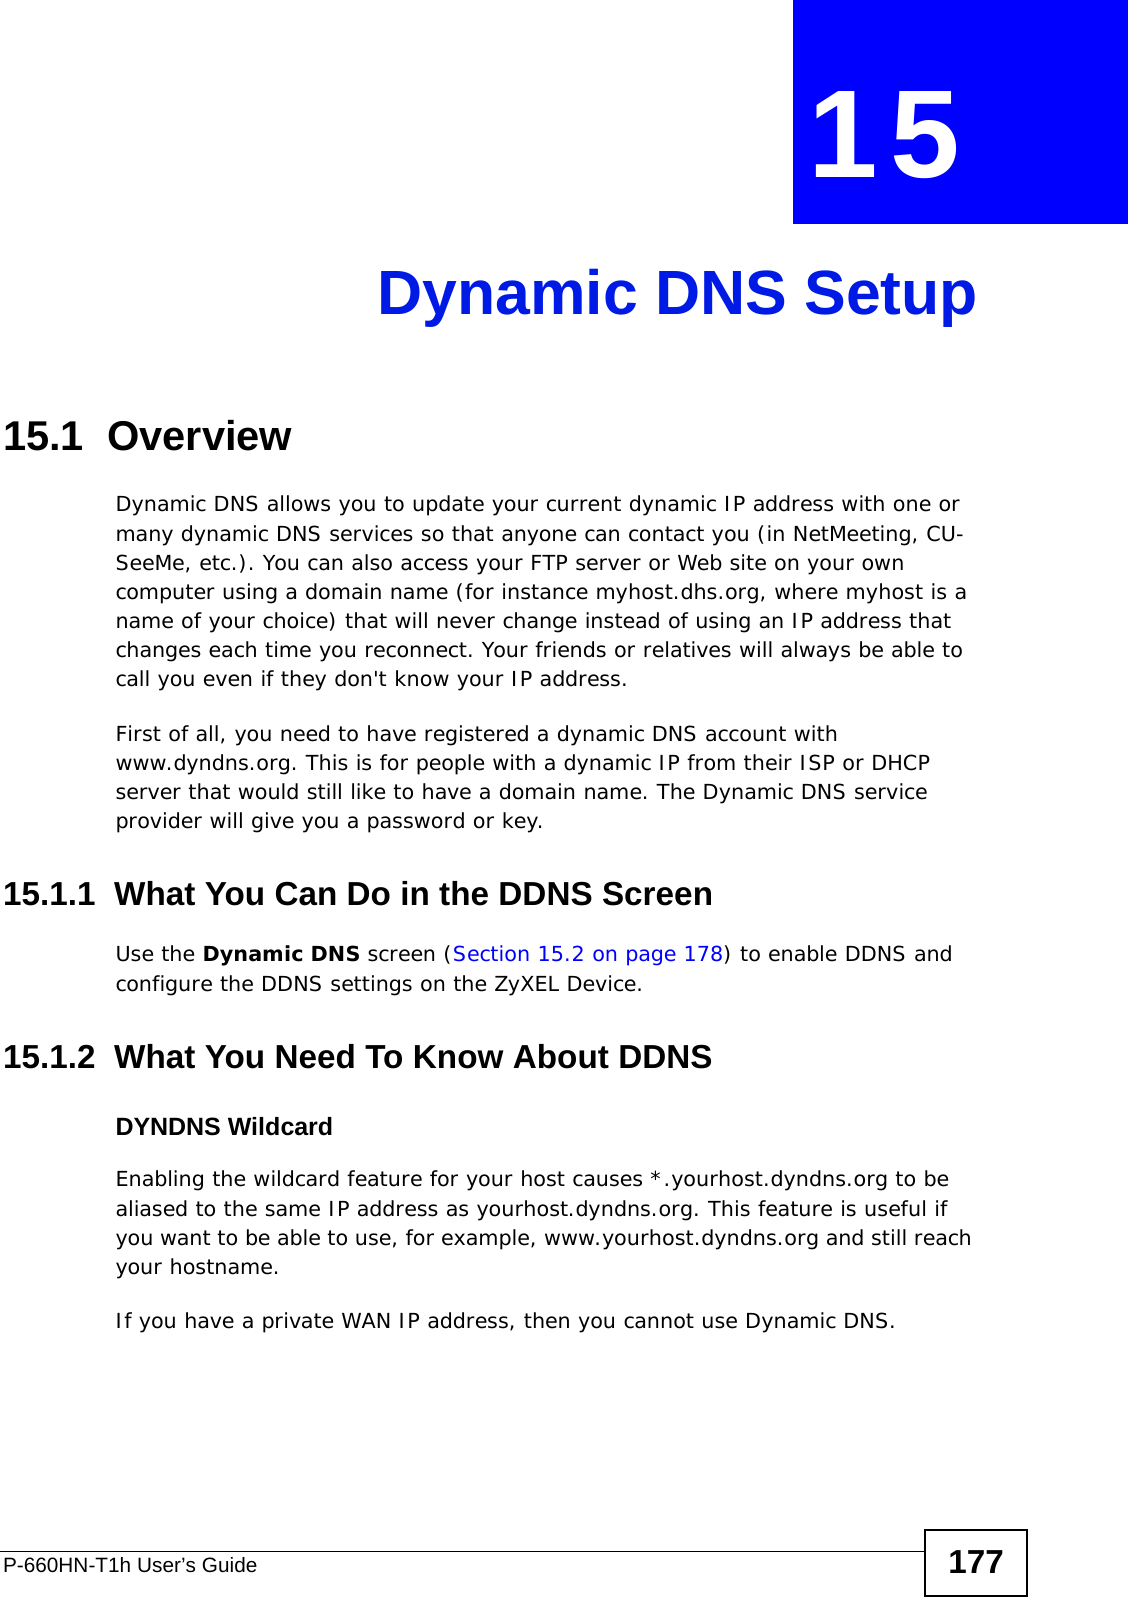 P-660HN-T1h User’s Guide 177CHAPTER  15 Dynamic DNS Setup15.1  Overview Dynamic DNS allows you to update your current dynamic IP address with one or many dynamic DNS services so that anyone can contact you (in NetMeeting, CU-SeeMe, etc.). You can also access your FTP server or Web site on your own computer using a domain name (for instance myhost.dhs.org, where myhost is a name of your choice) that will never change instead of using an IP address that changes each time you reconnect. Your friends or relatives will always be able to call you even if they don&apos;t know your IP address.First of all, you need to have registered a dynamic DNS account with www.dyndns.org. This is for people with a dynamic IP from their ISP or DHCP server that would still like to have a domain name. The Dynamic DNS service provider will give you a password or key. 15.1.1  What You Can Do in the DDNS ScreenUse the Dynamic DNS screen (Section 15.2 on page 178) to enable DDNS and configure the DDNS settings on the ZyXEL Device.15.1.2  What You Need To Know About DDNSDYNDNS WildcardEnabling the wildcard feature for your host causes *.yourhost.dyndns.org to be aliased to the same IP address as yourhost.dyndns.org. This feature is useful if you want to be able to use, for example, www.yourhost.dyndns.org and still reach your hostname.If you have a private WAN IP address, then you cannot use Dynamic DNS.